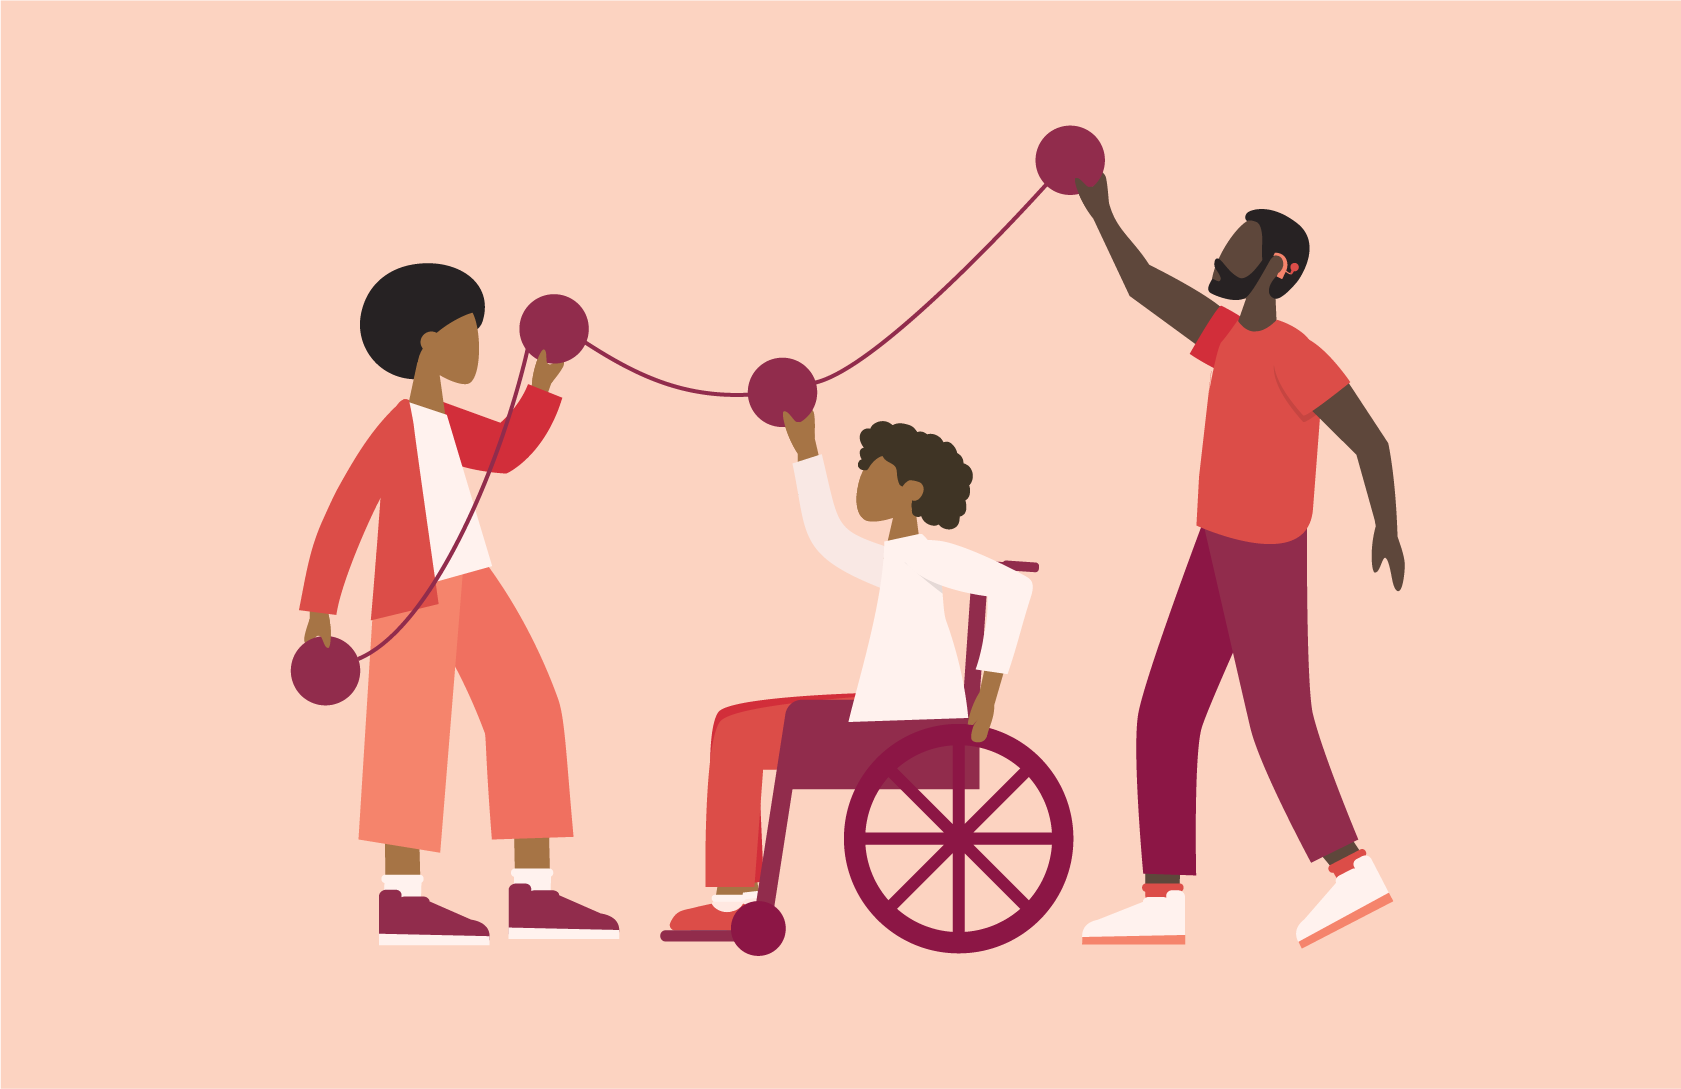 OXD illustration of a person on left holding a conceptual ball connected with string with a person in a wheelchair holding the next ball and then a person to the right holding the last ball, all in shades of red.